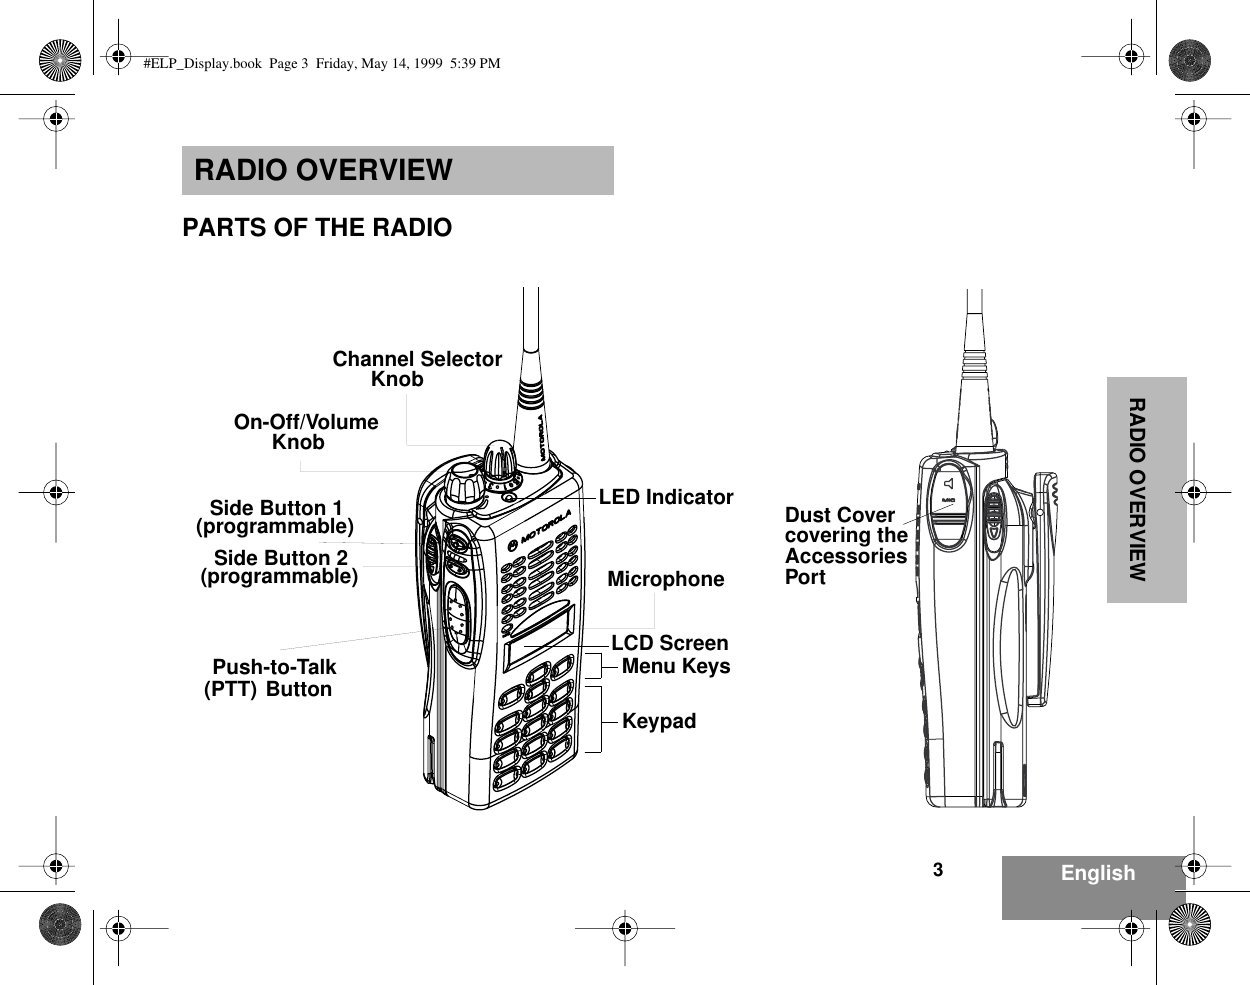  RADIO OVERVIEW 3 English RADIO OVERVIEW PARTS OF THE RADIOOn-Off/VolumeKnobMicrophone(programmable)Side Button 1Push-to-Talk(PTT) ButtonLED Indicator(programmable)Side Button 2Channel SelectorKnobLCD ScreenMenu KeysKeypadDust Covercovering theAccessoriesPort #ELP_Display.book  Page 3  Friday, May 14, 1999  5:39 PM